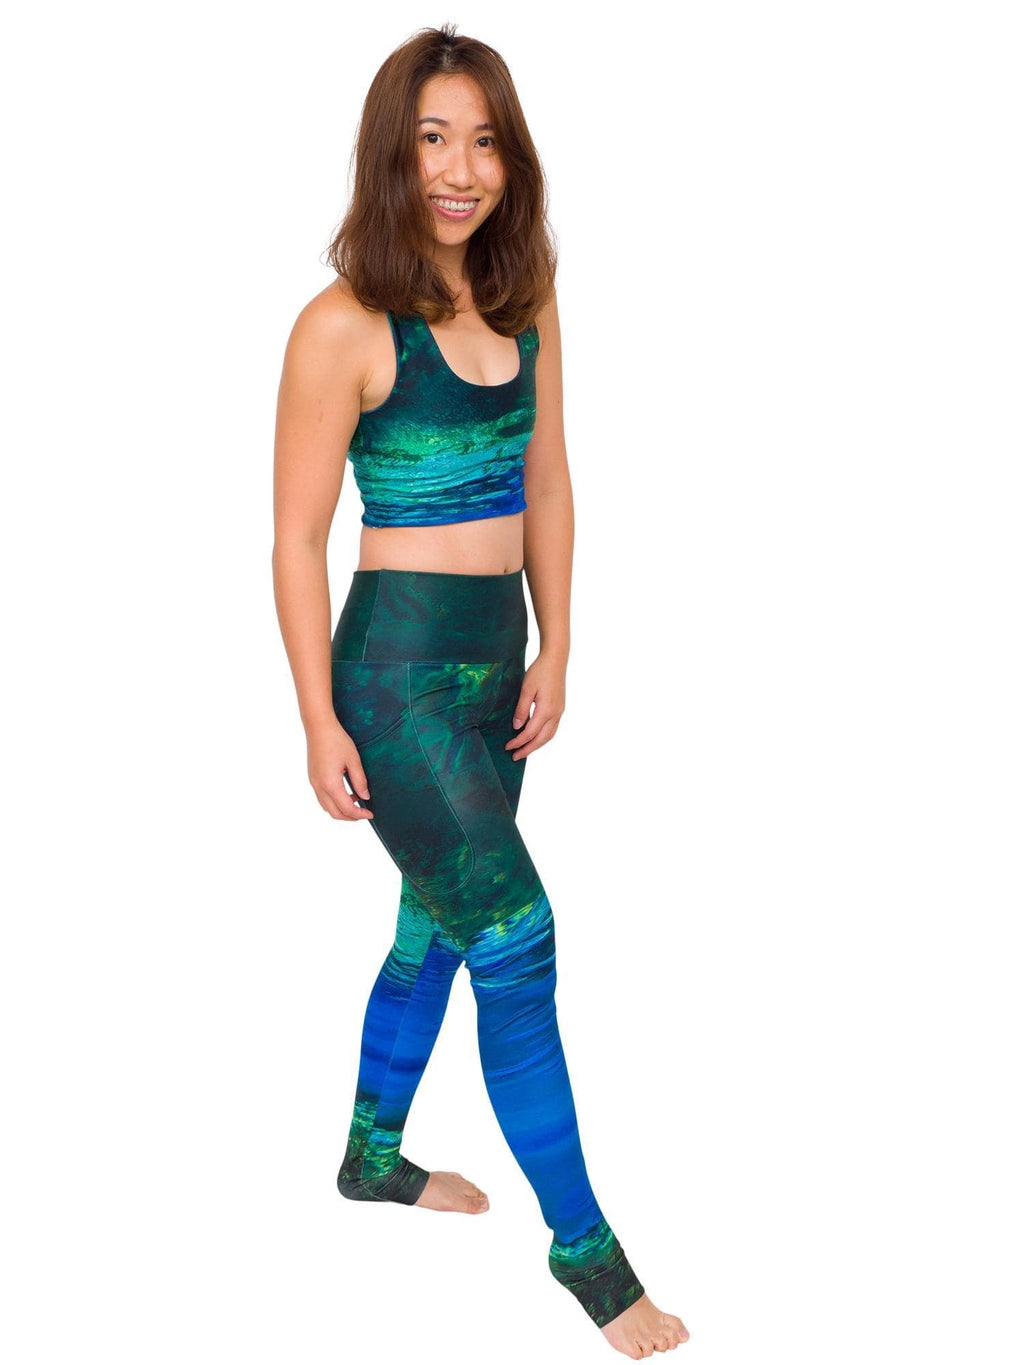 Model: Laura is a hurricane researcher and avid scuba diver. She is 5&#39;3&quot;, 120lbs, 34B and is wearing a S legging and S top.